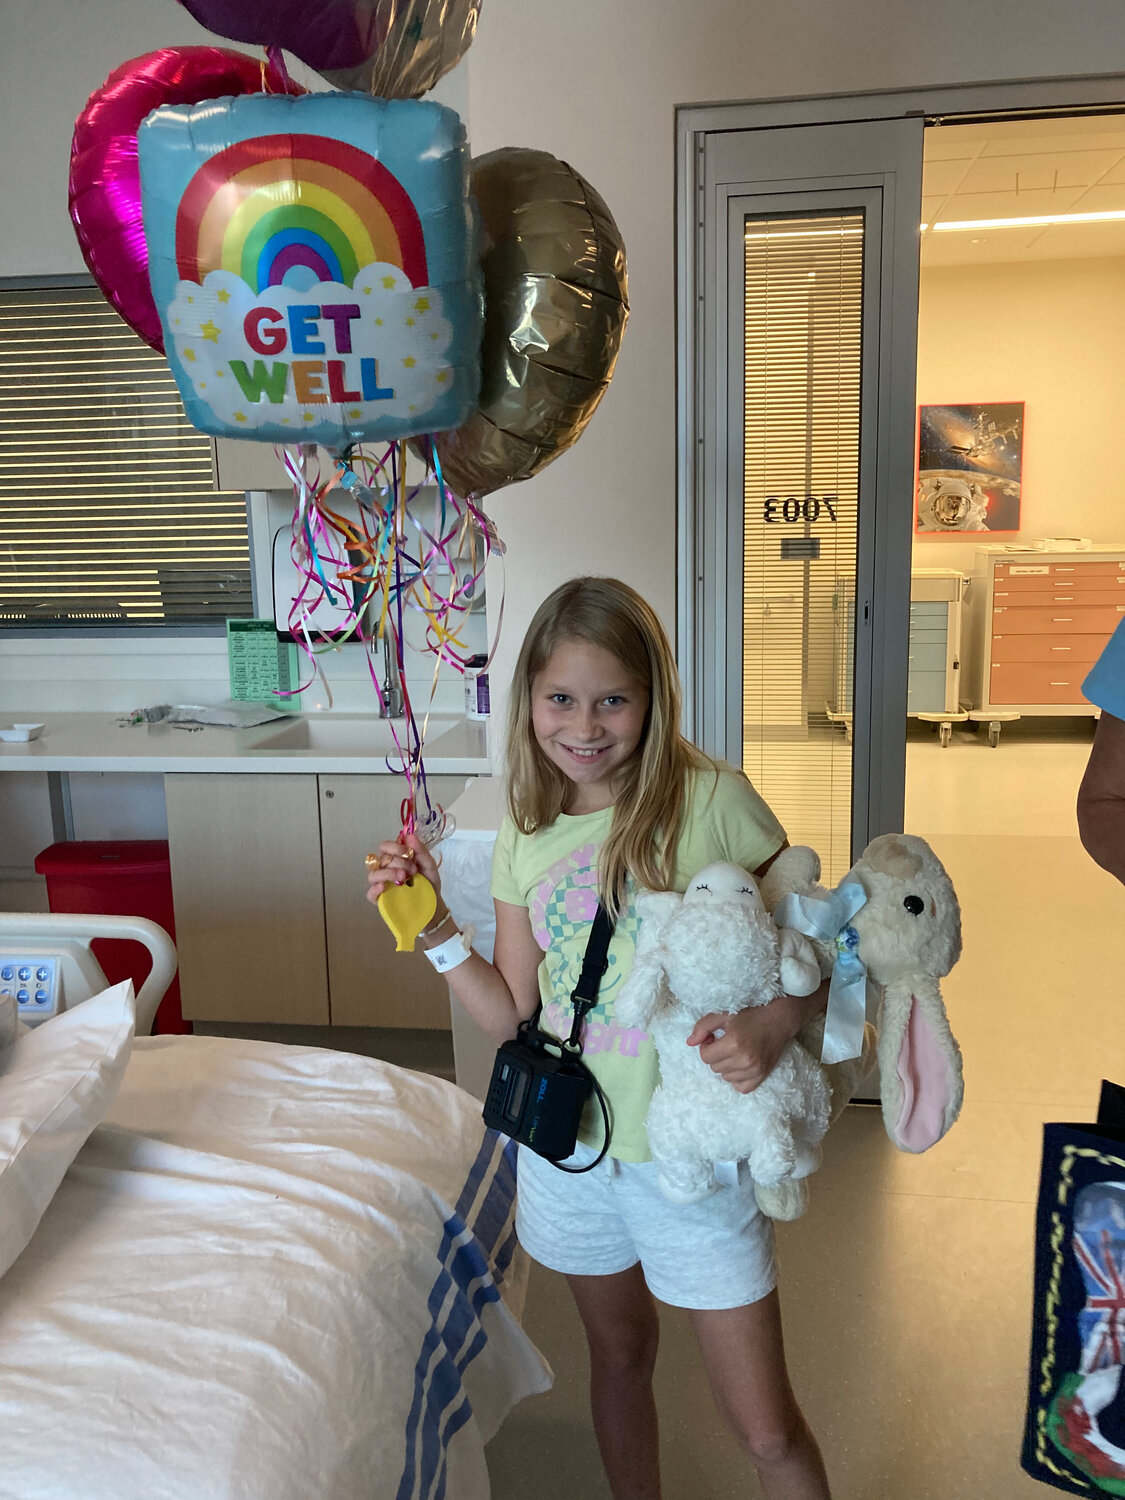 There have been plenty of well wishes sent Bryn’s way during her recent medical journey.